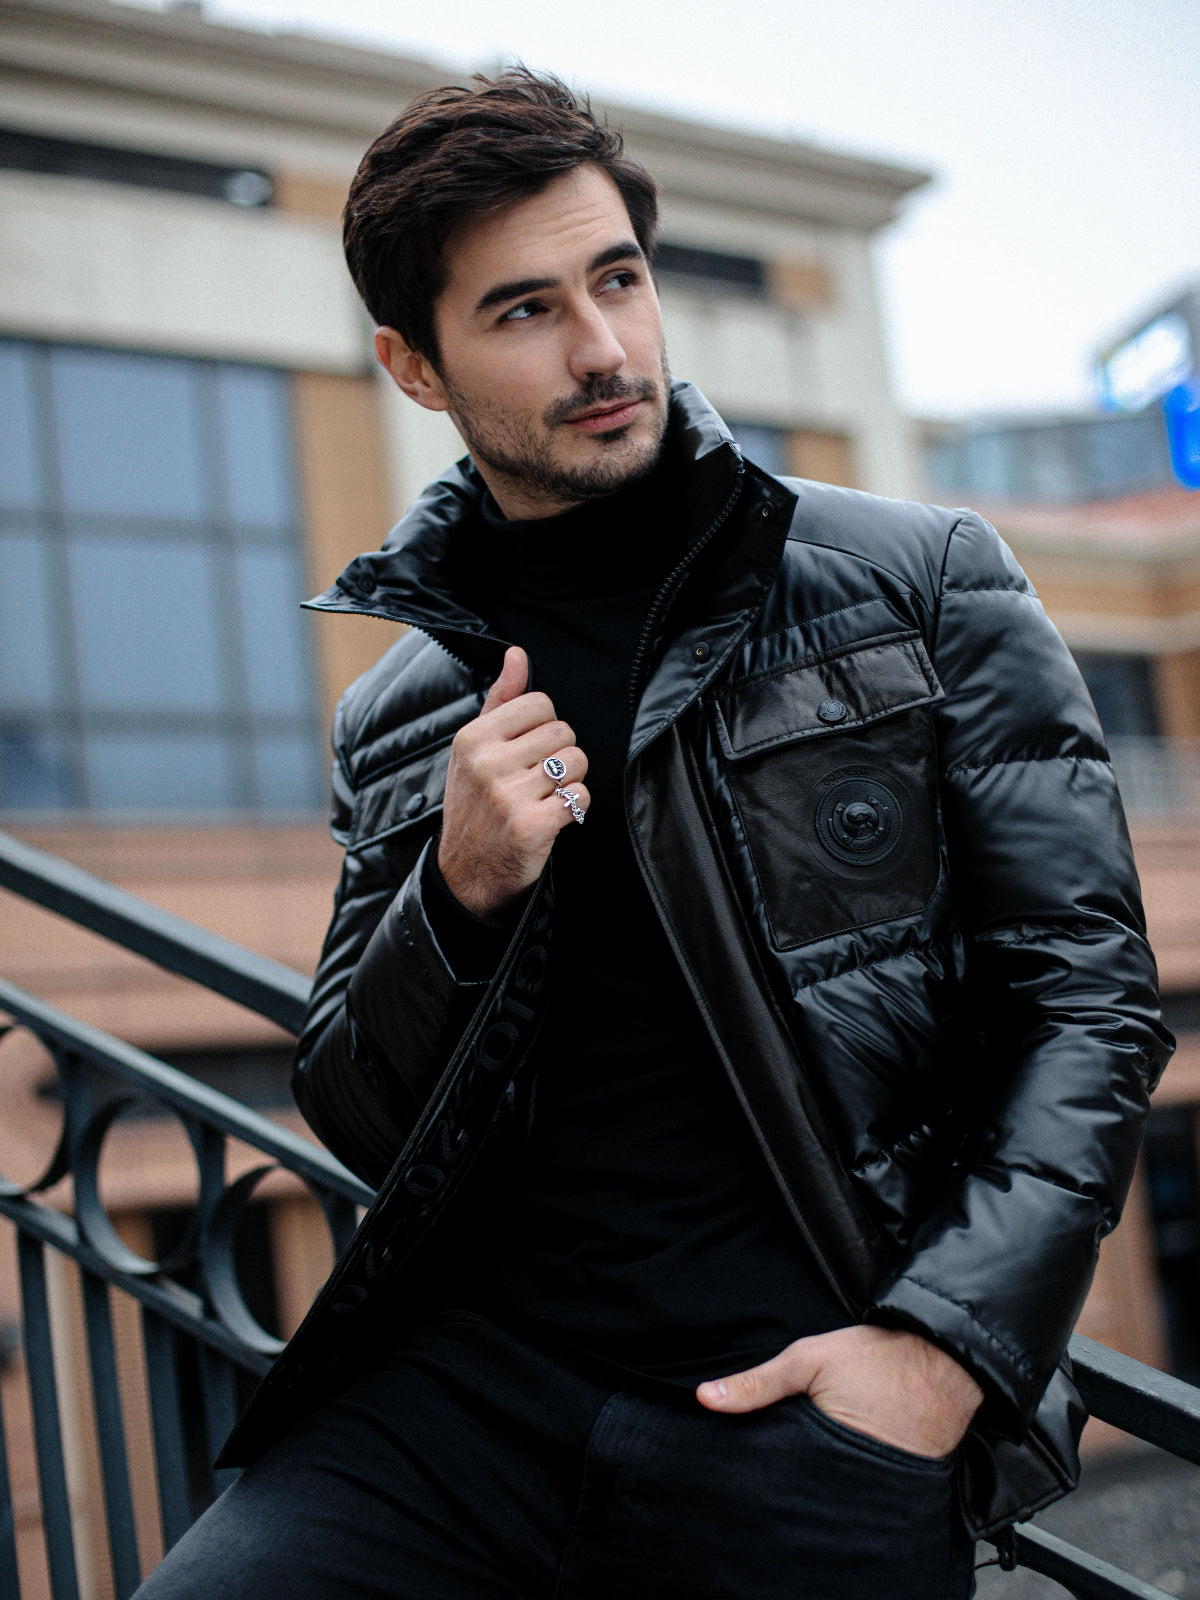 Are Leather Jackets Warm Enough for Winter? – PalaLeather